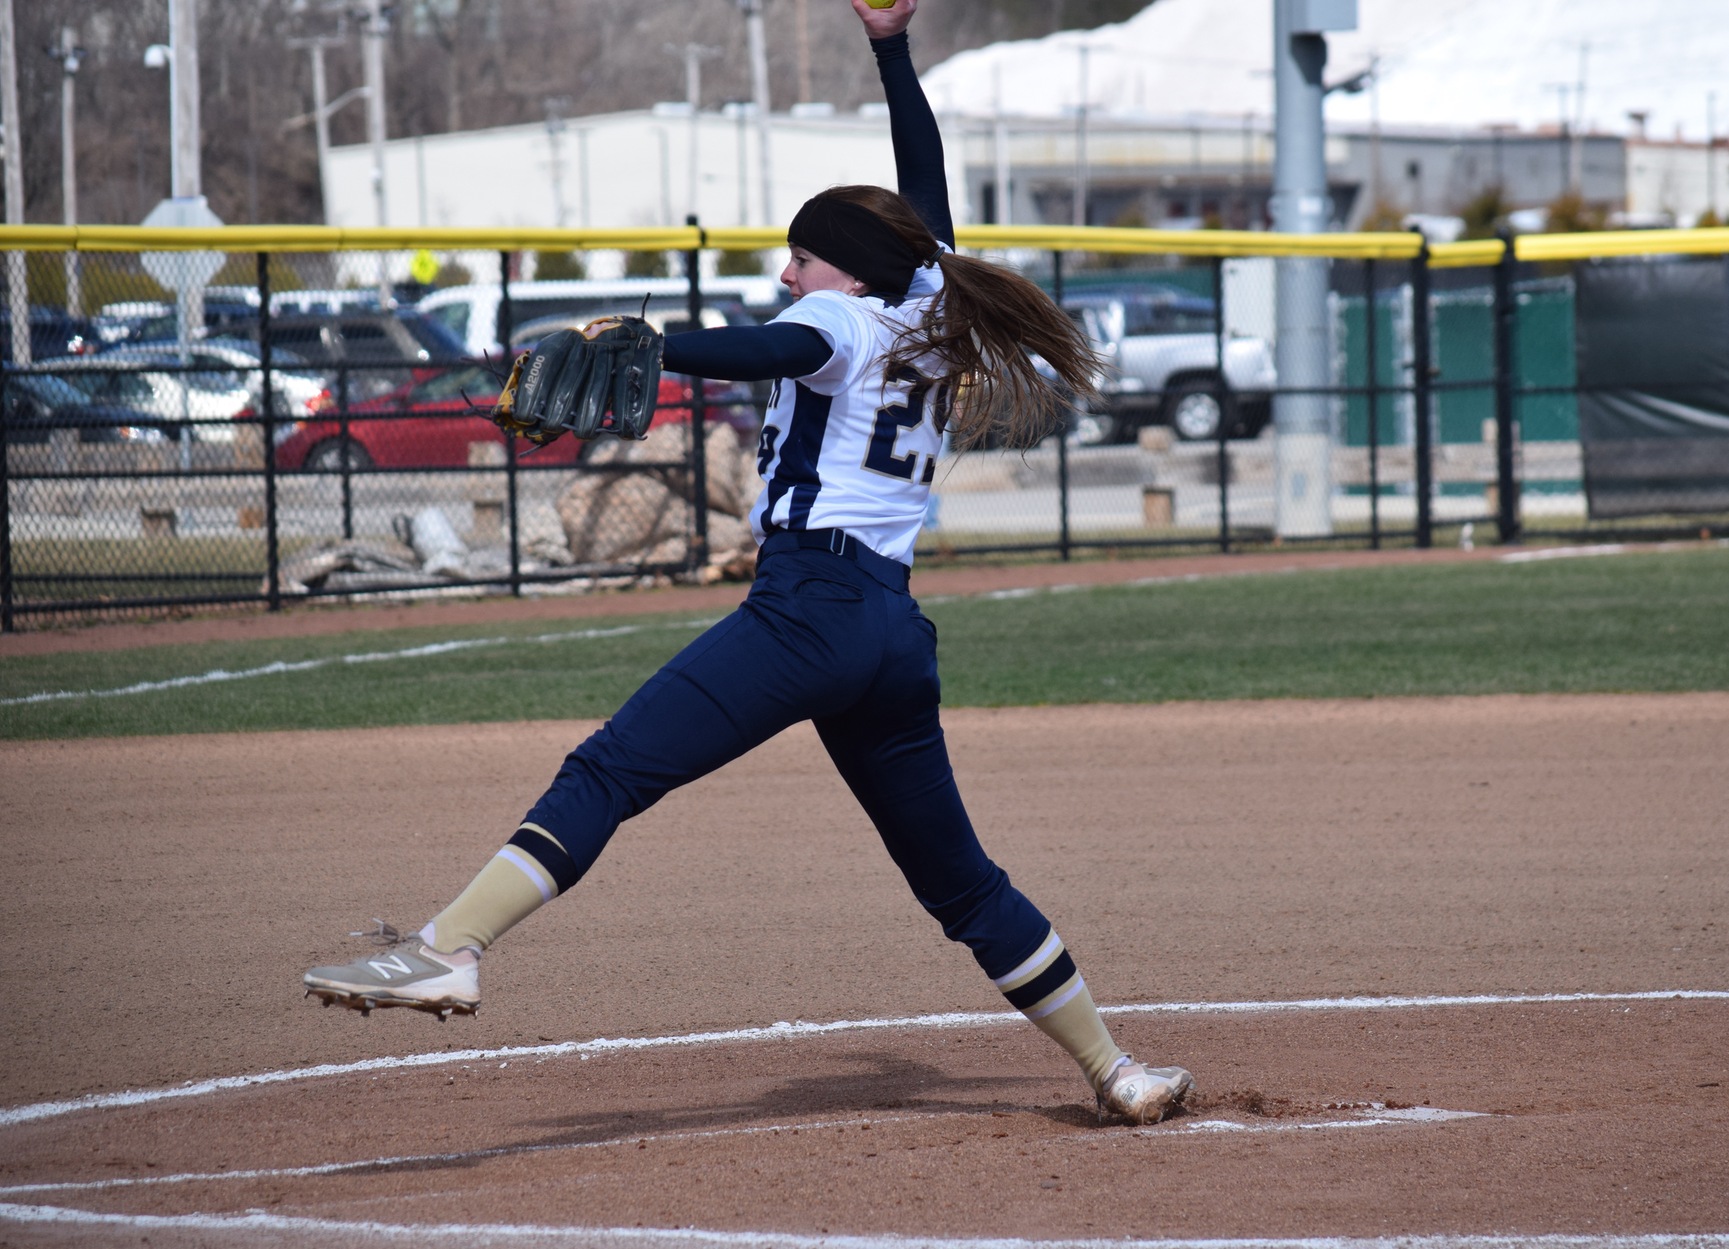 Splitsville: Norwich Grabs Game One, Softball Shutouts Game Two